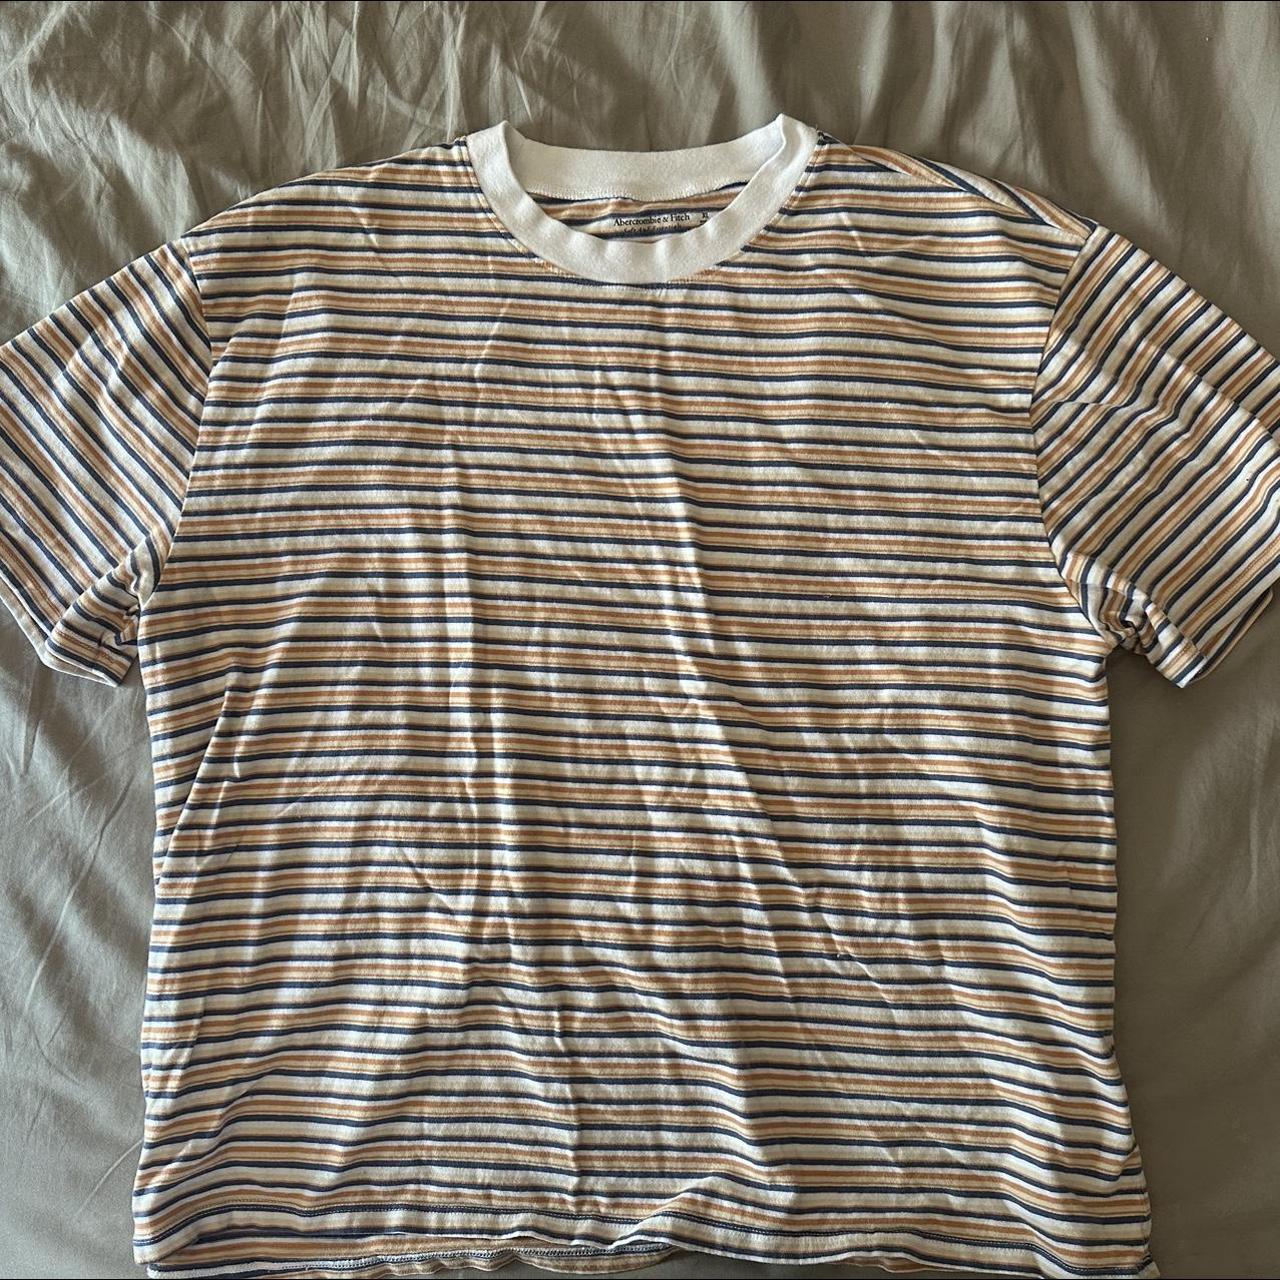 Abercrombie & Fitch Soft A&F Essentials Short Sleeve... - Depop